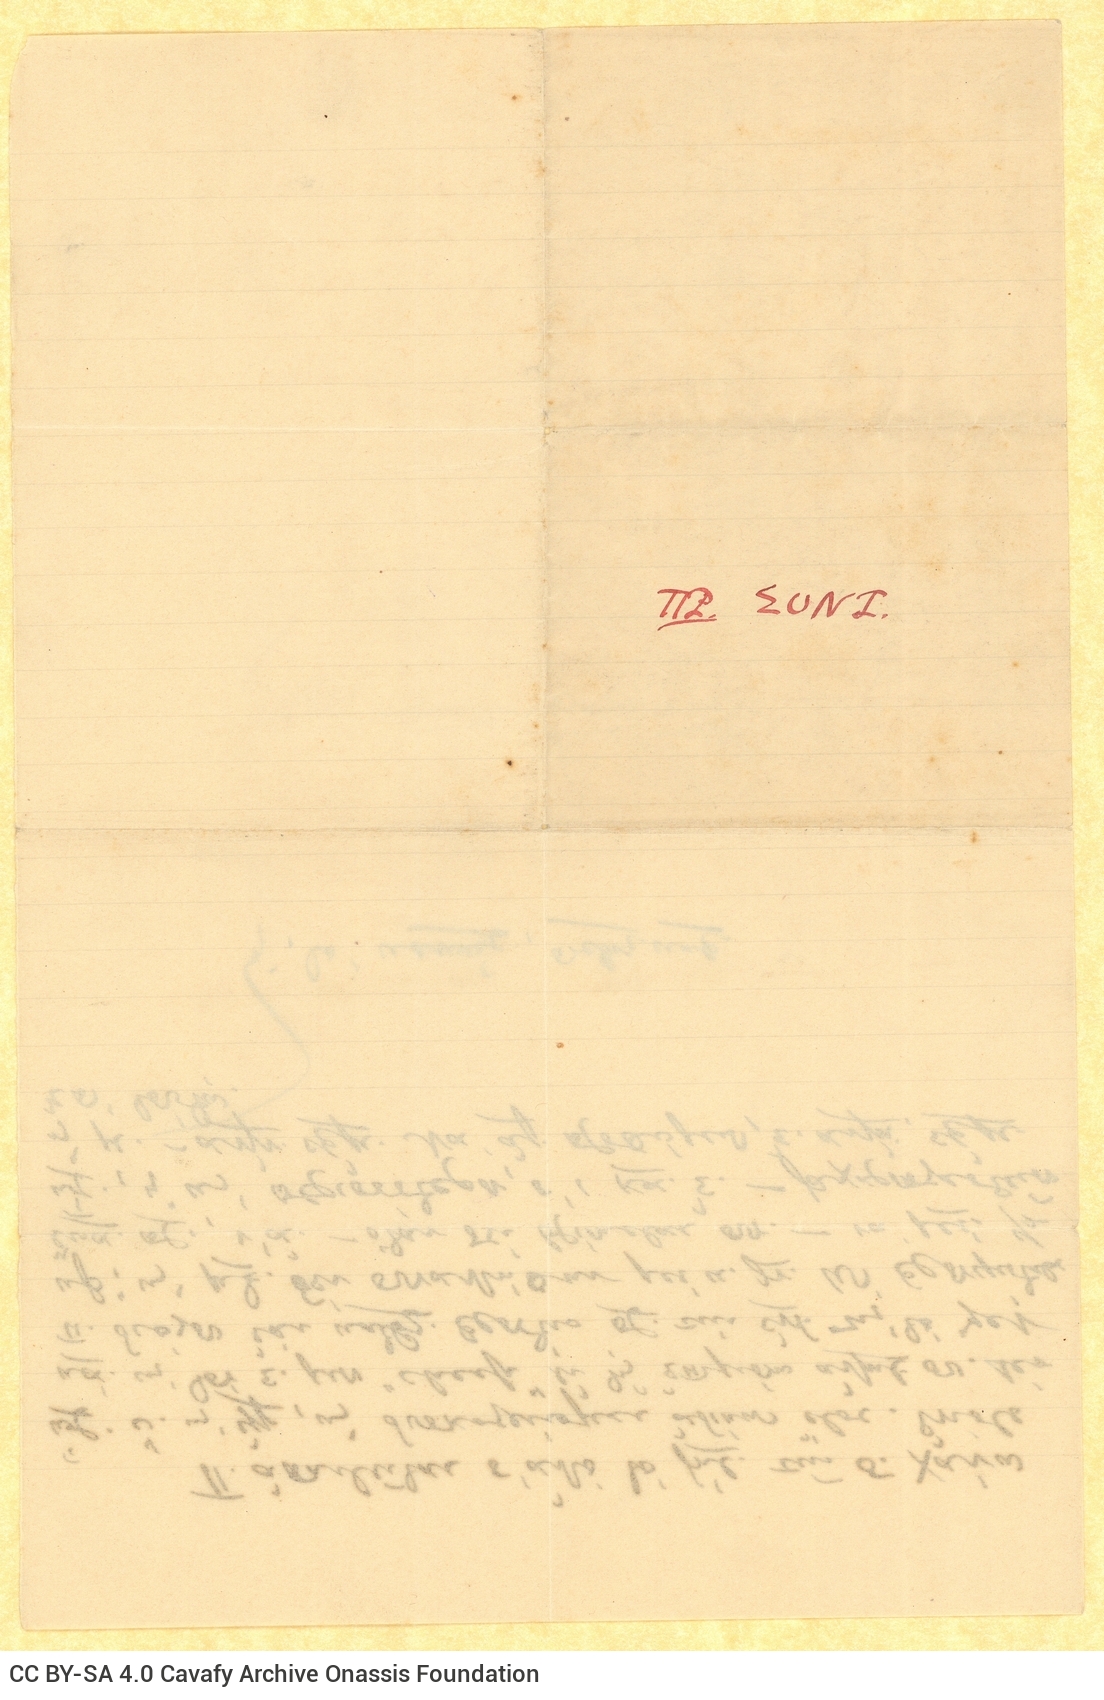 Handwritten note on one side of a ruled sheet. Addition in pencil. Extensive use of abbreviations. The abbreviated title o